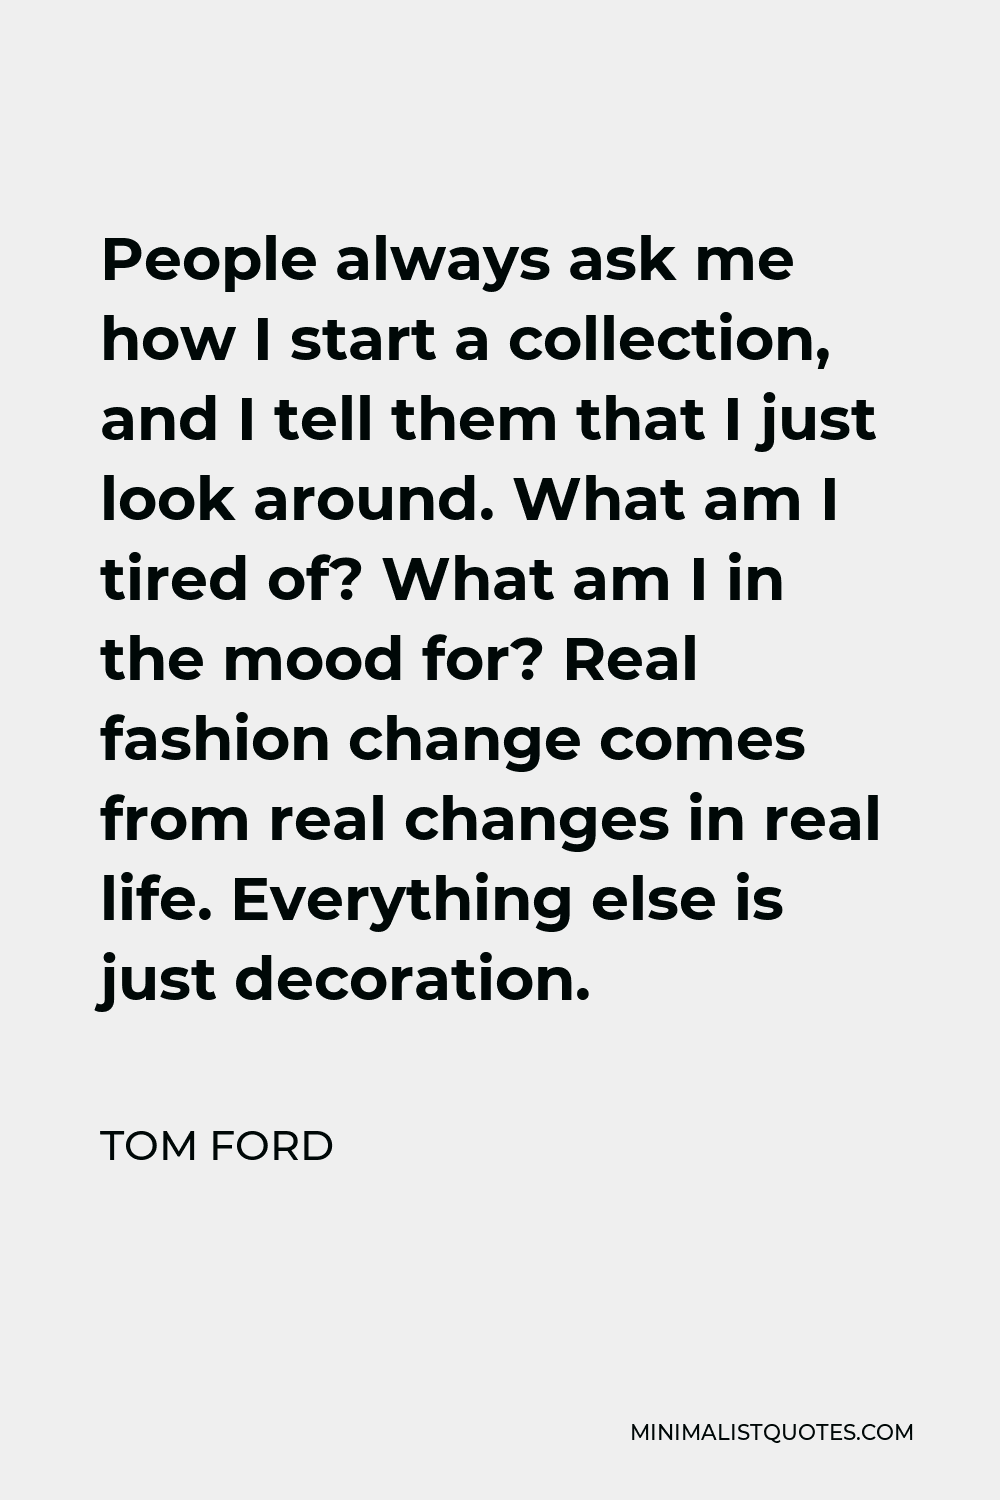 Tom Ford Quote: People always ask me how I start a collection, and I tell  them that I just look around. What am I tired of? What am I in the mood